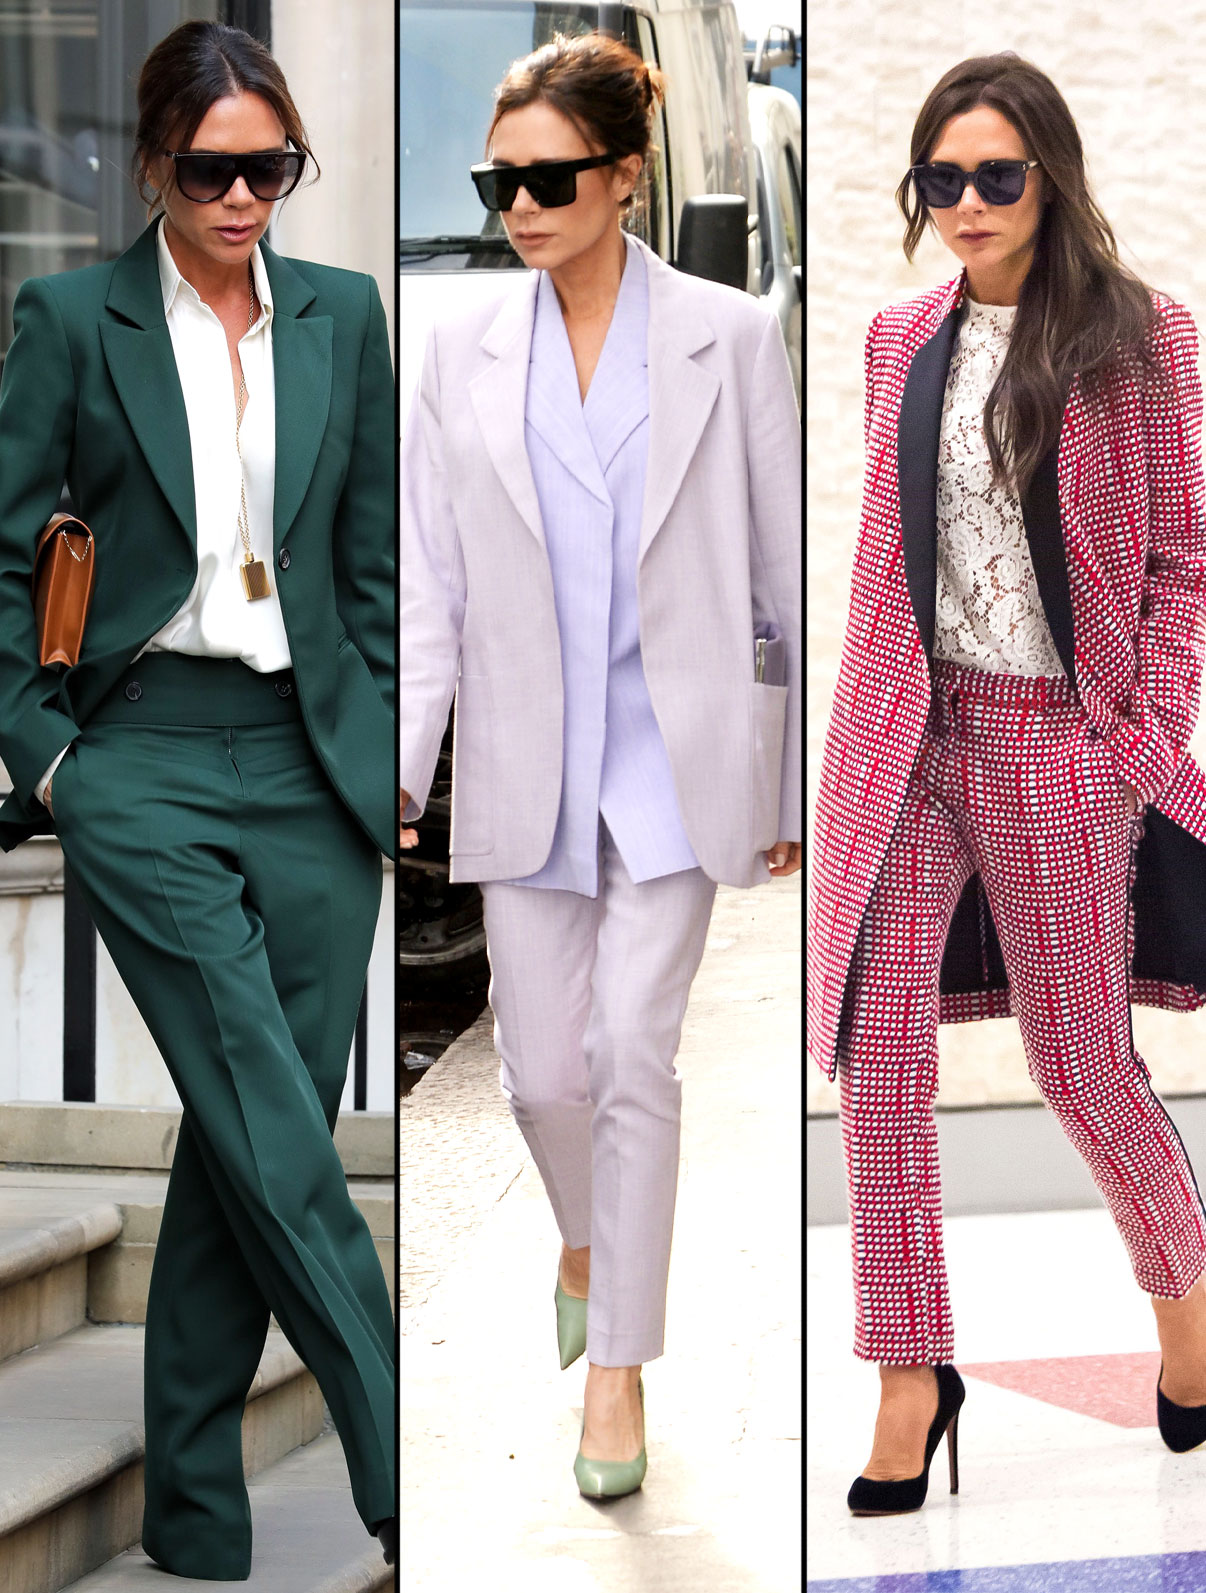 15 Office Outfit Ideas to Wear to Work